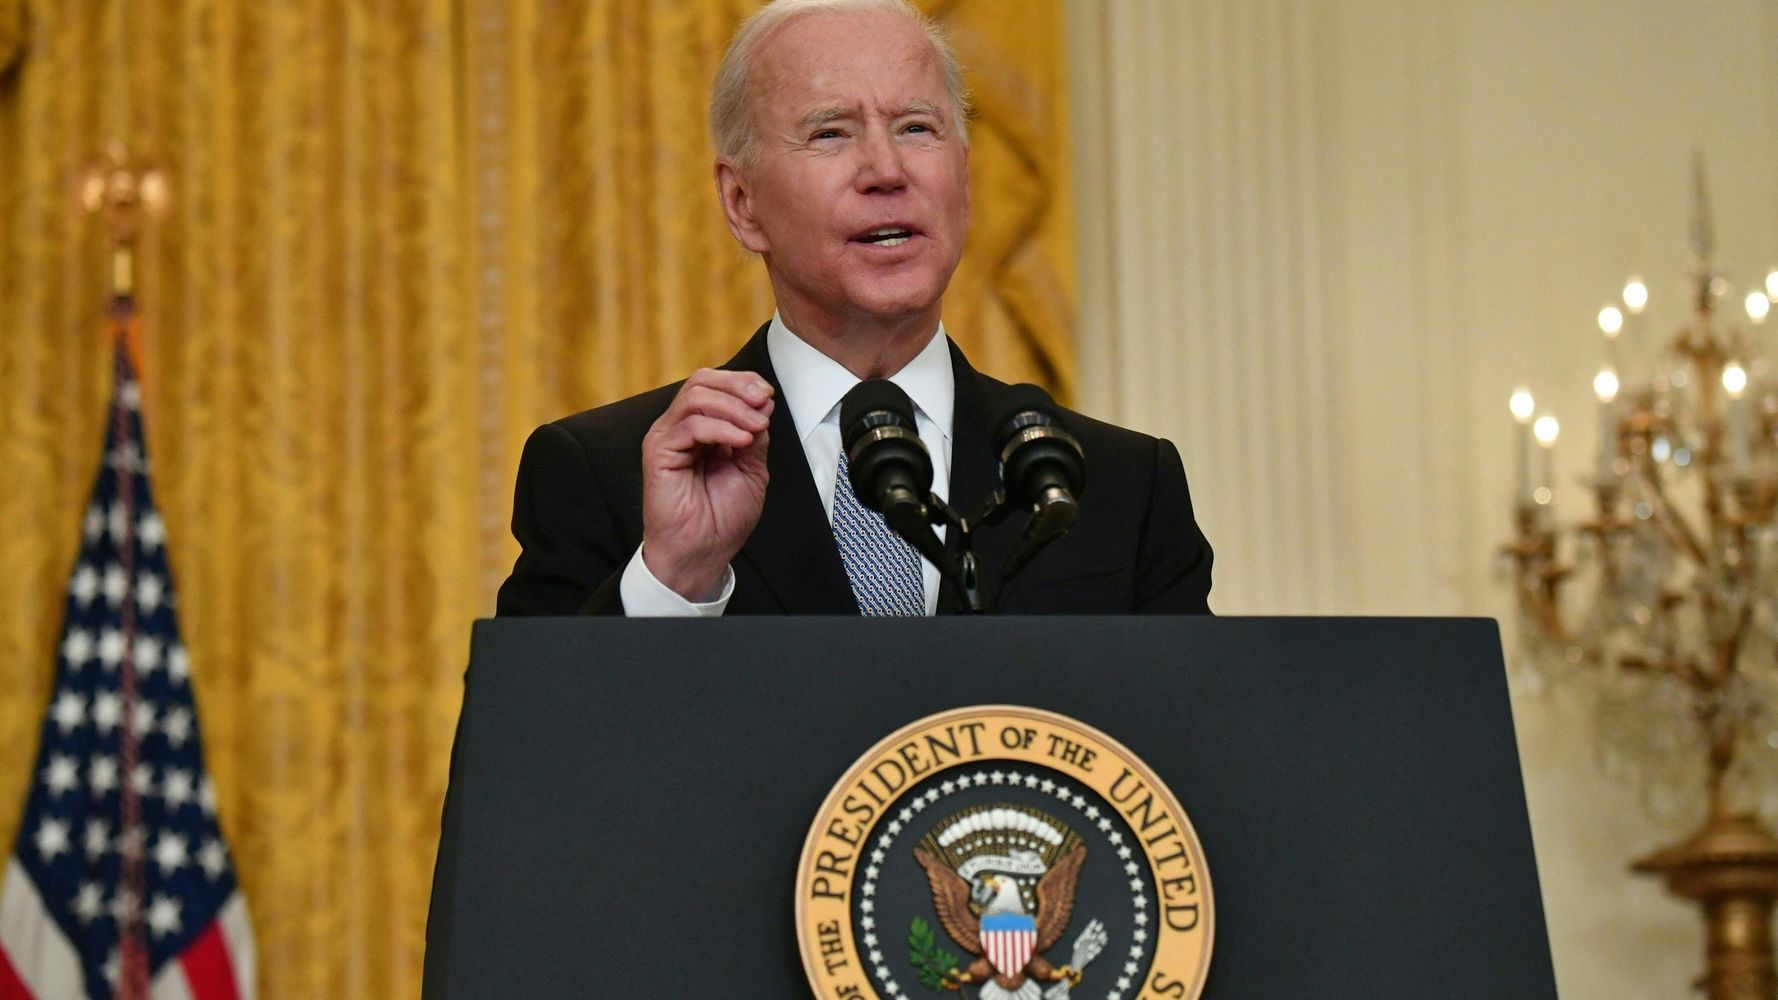 Joe Biden Expresses Support For Cease-Fire In Call With Israeli Prime Minister Netanyahu